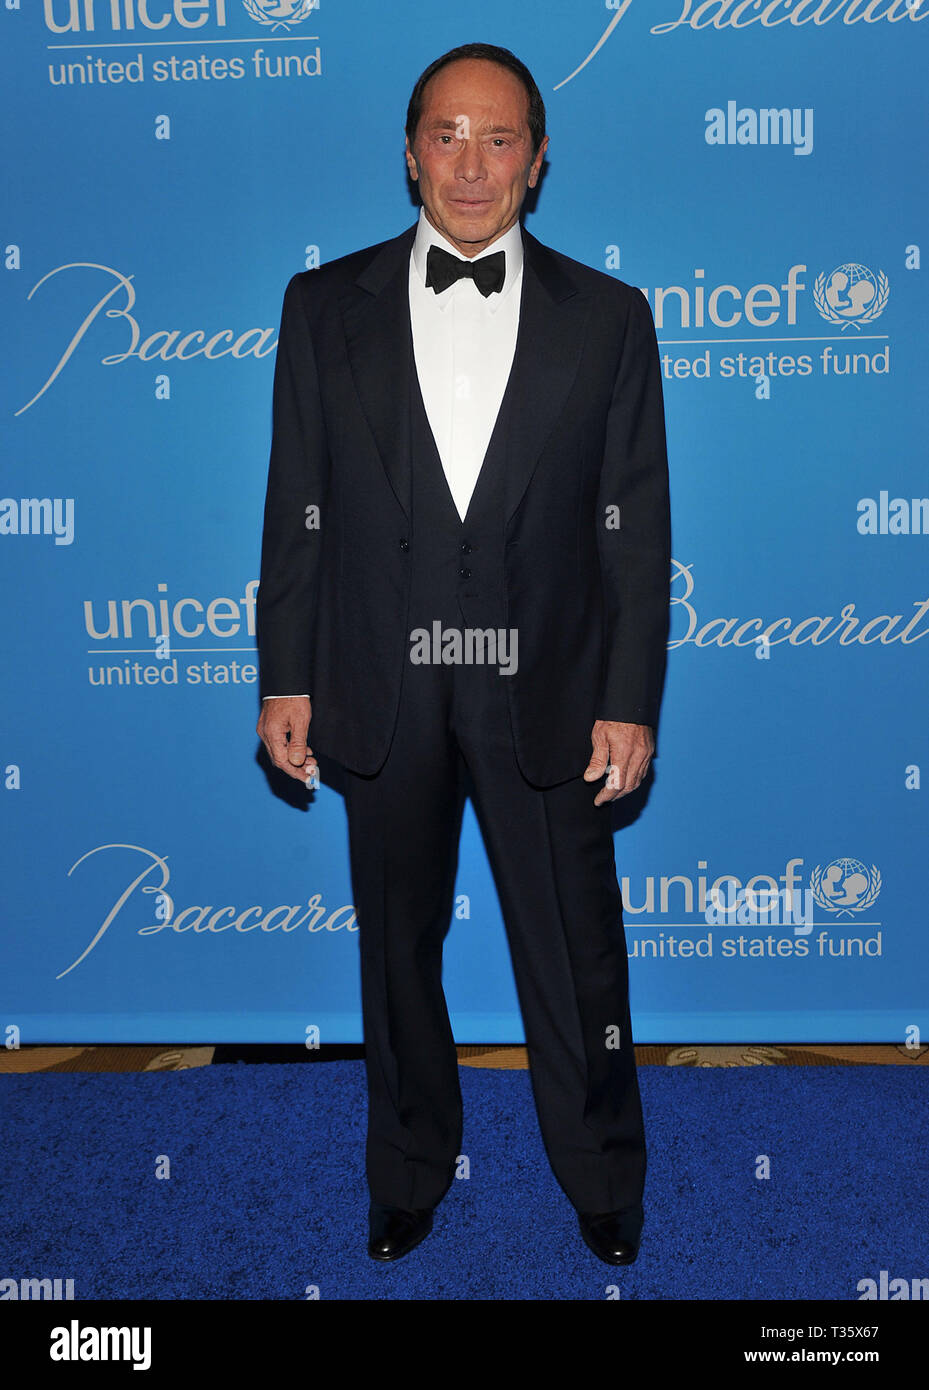 Paul Anka 41  - 2009 UNICEF Ball at the Beverly Wilshire Hotel In Los AngelesPaul Anka 41 Red Carpet Event, Vertical, USA, Film Industry, Celebrities,  Photography, Bestof, Arts Culture and Entertainment, Topix Celebrities fashion /  Vertical, Best of, Event in Hollywood Life - California,  Red Carpet and backstage, USA, Film Industry, Celebrities,  movie celebrities, TV celebrities, Music celebrities, Photography, Bestof, Arts Culture and Entertainment,  Topix, vertical, one person,, from the year , 2009, inquiry tsuni@Gamma-USA.com Fashion - Full Length Stock Photo